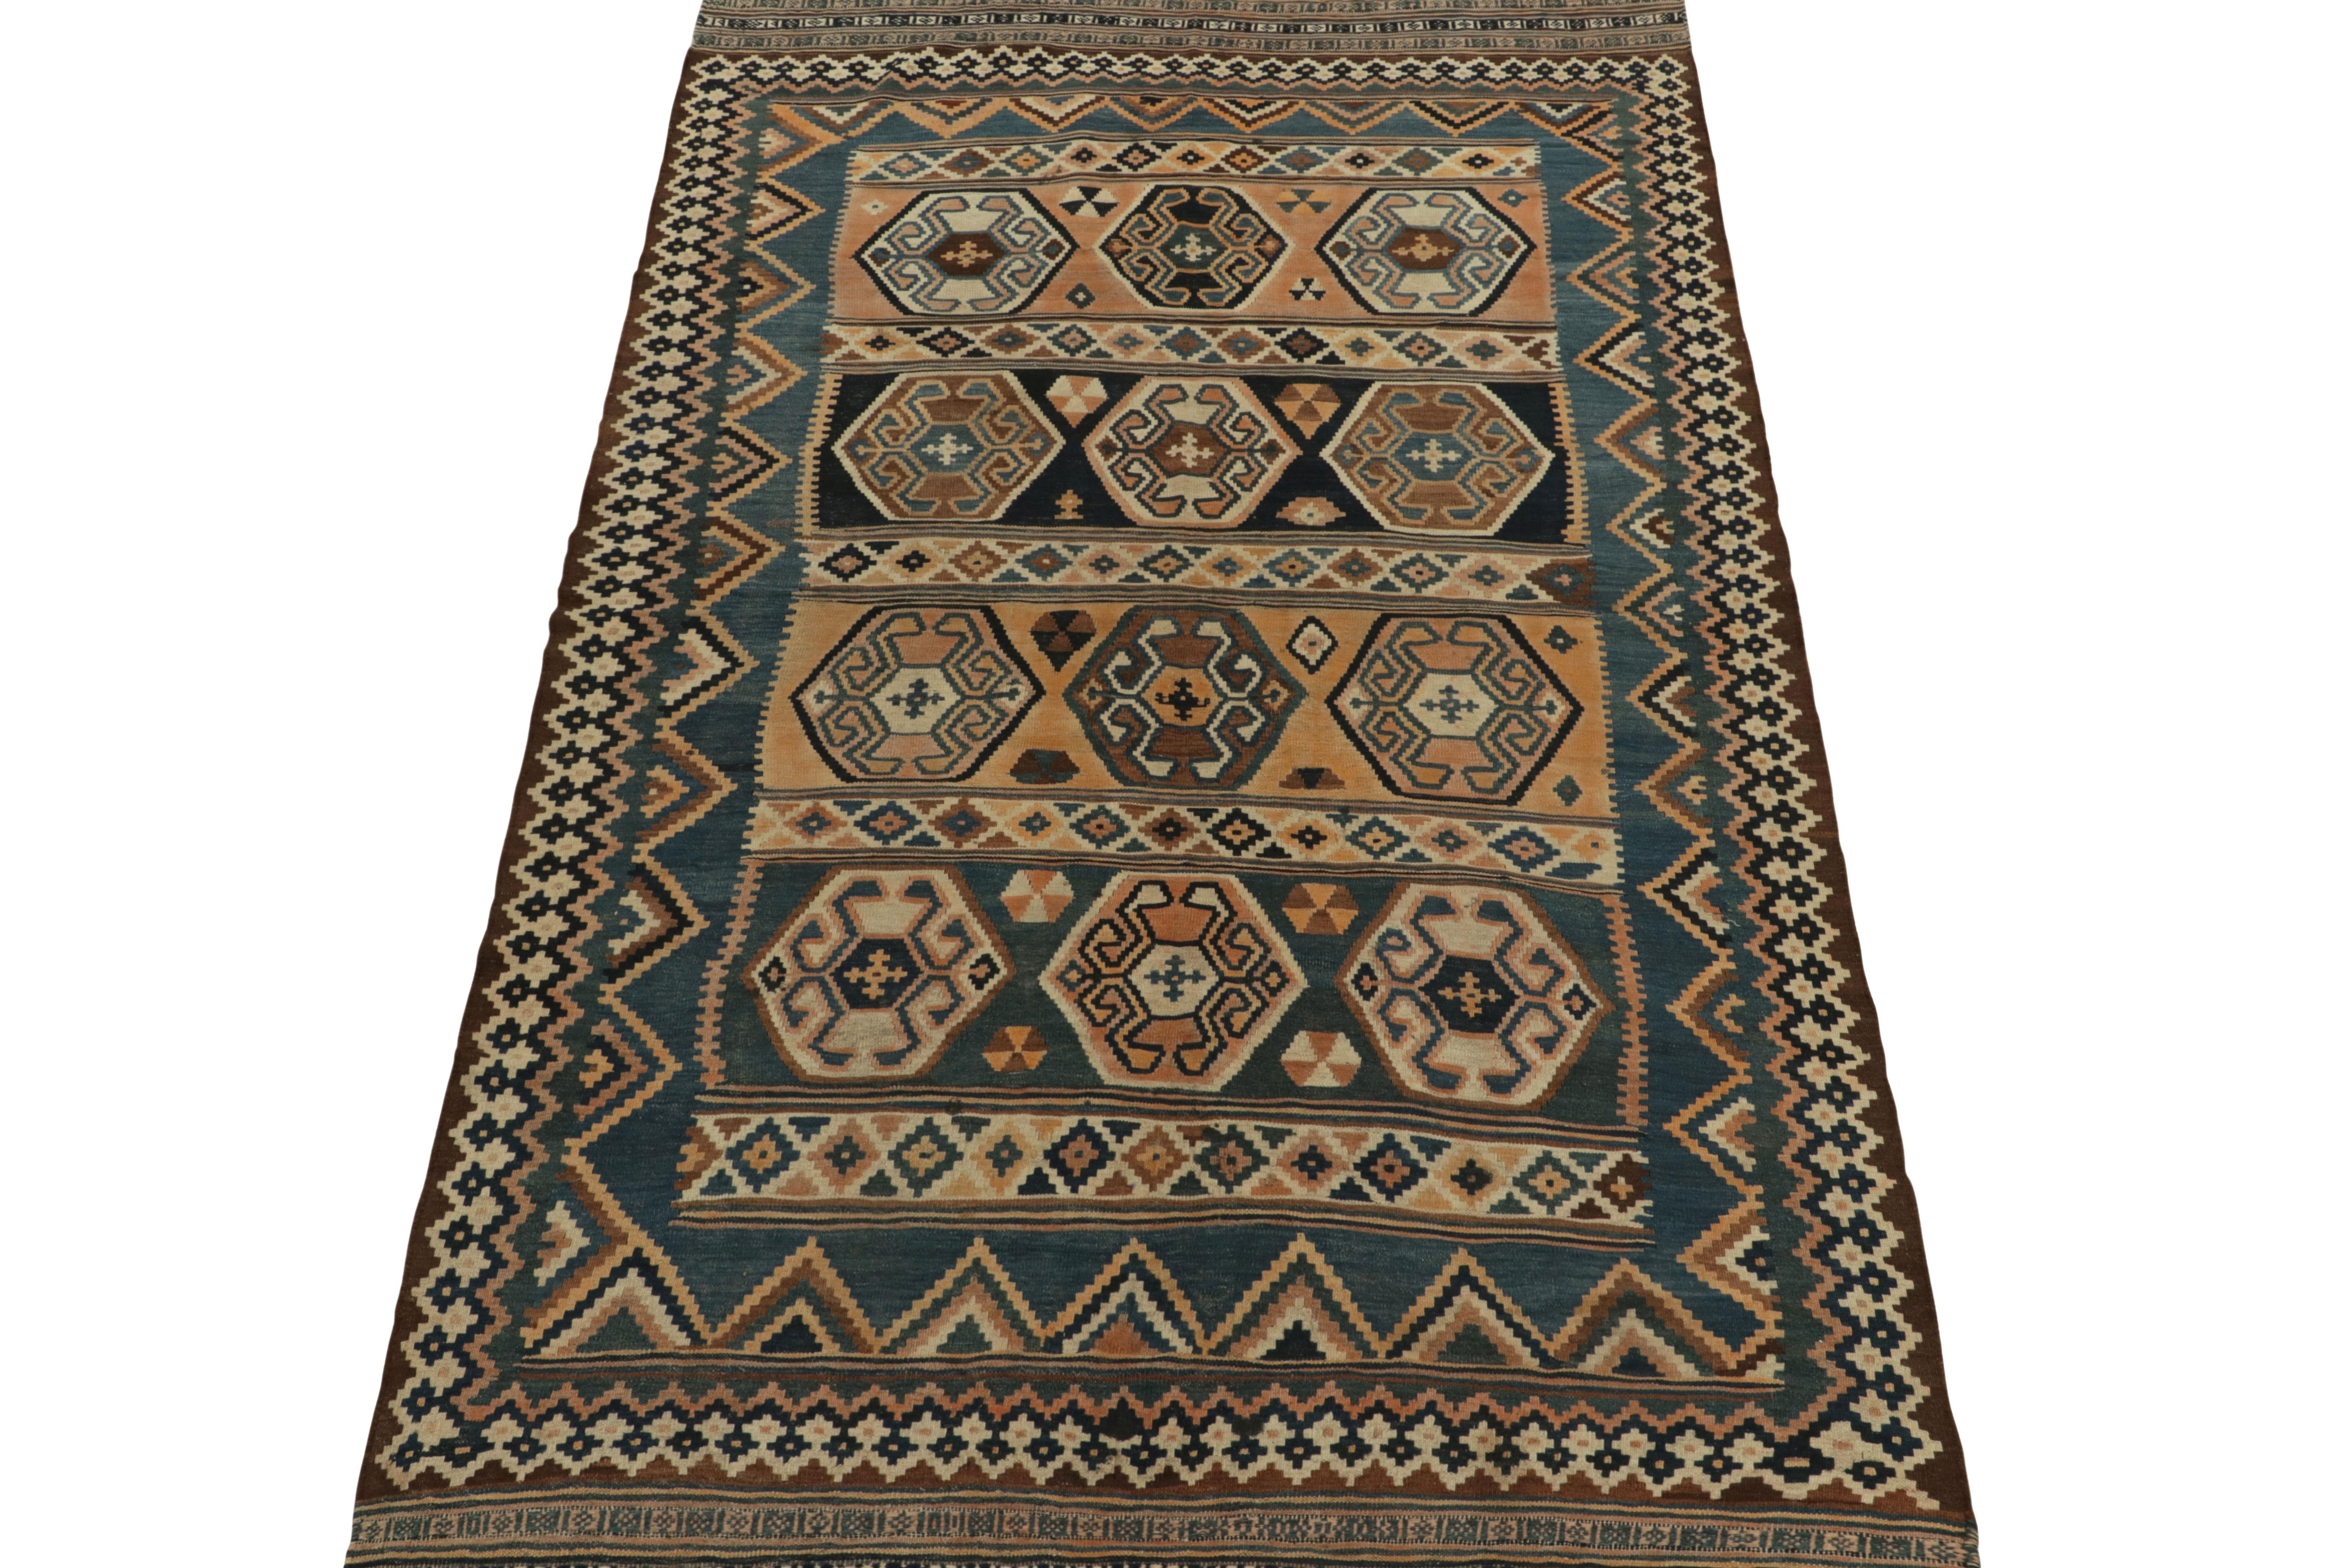 Hand-Knotted 1910s Antique Russian Kilim in Blue, Beige-Brown Tribal Pattern by Rug & Kilim